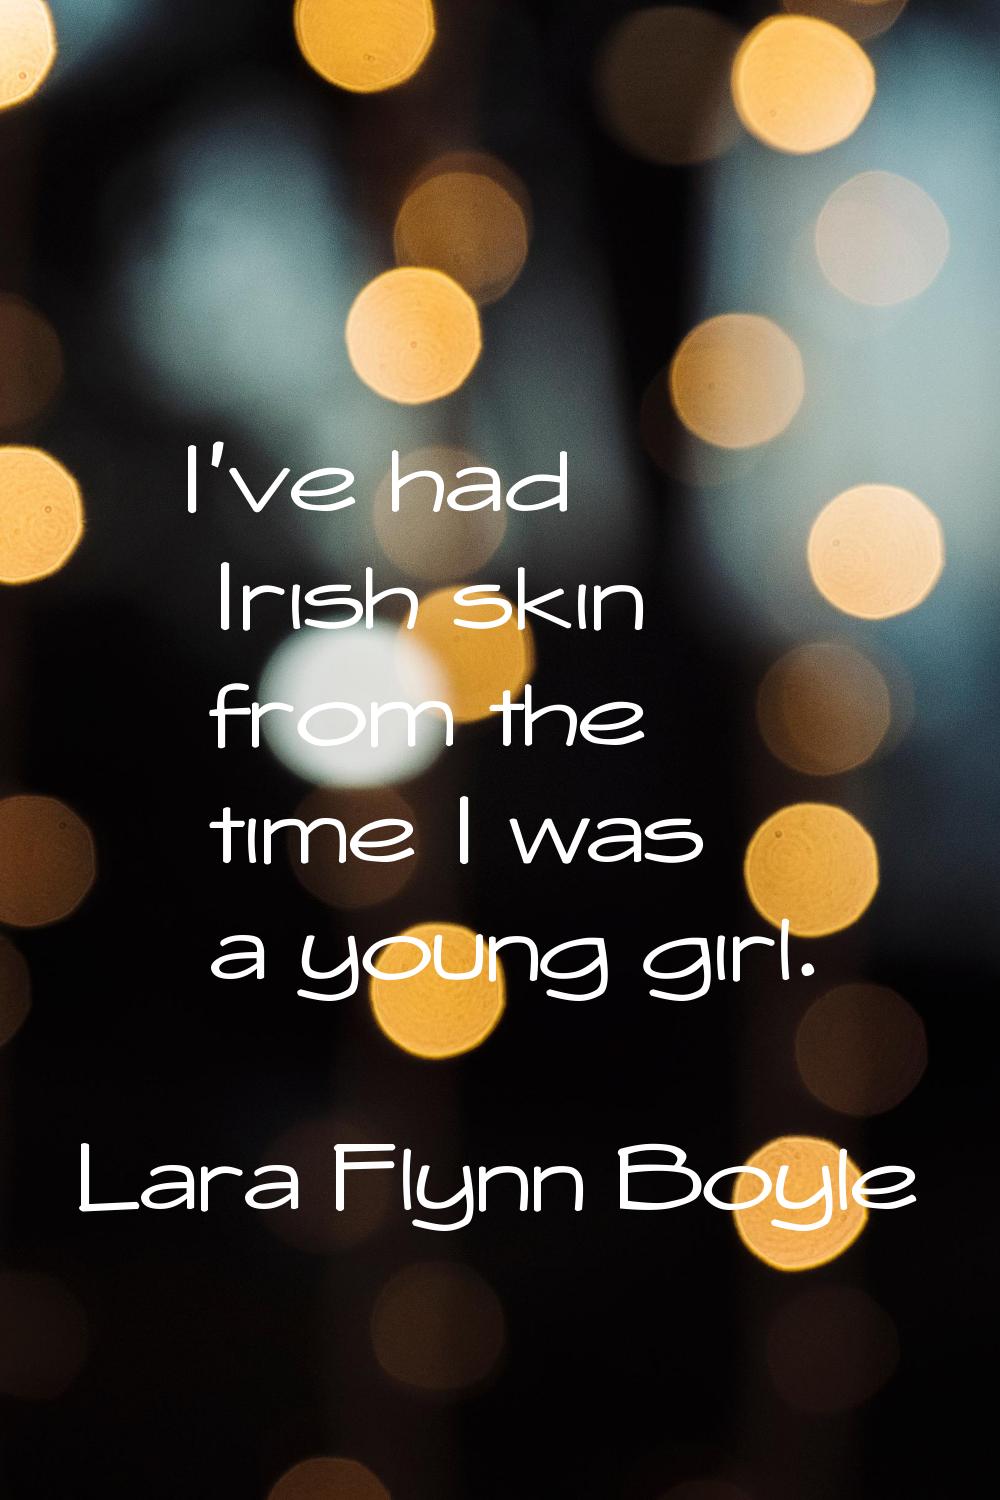 I've had Irish skin from the time I was a young girl.